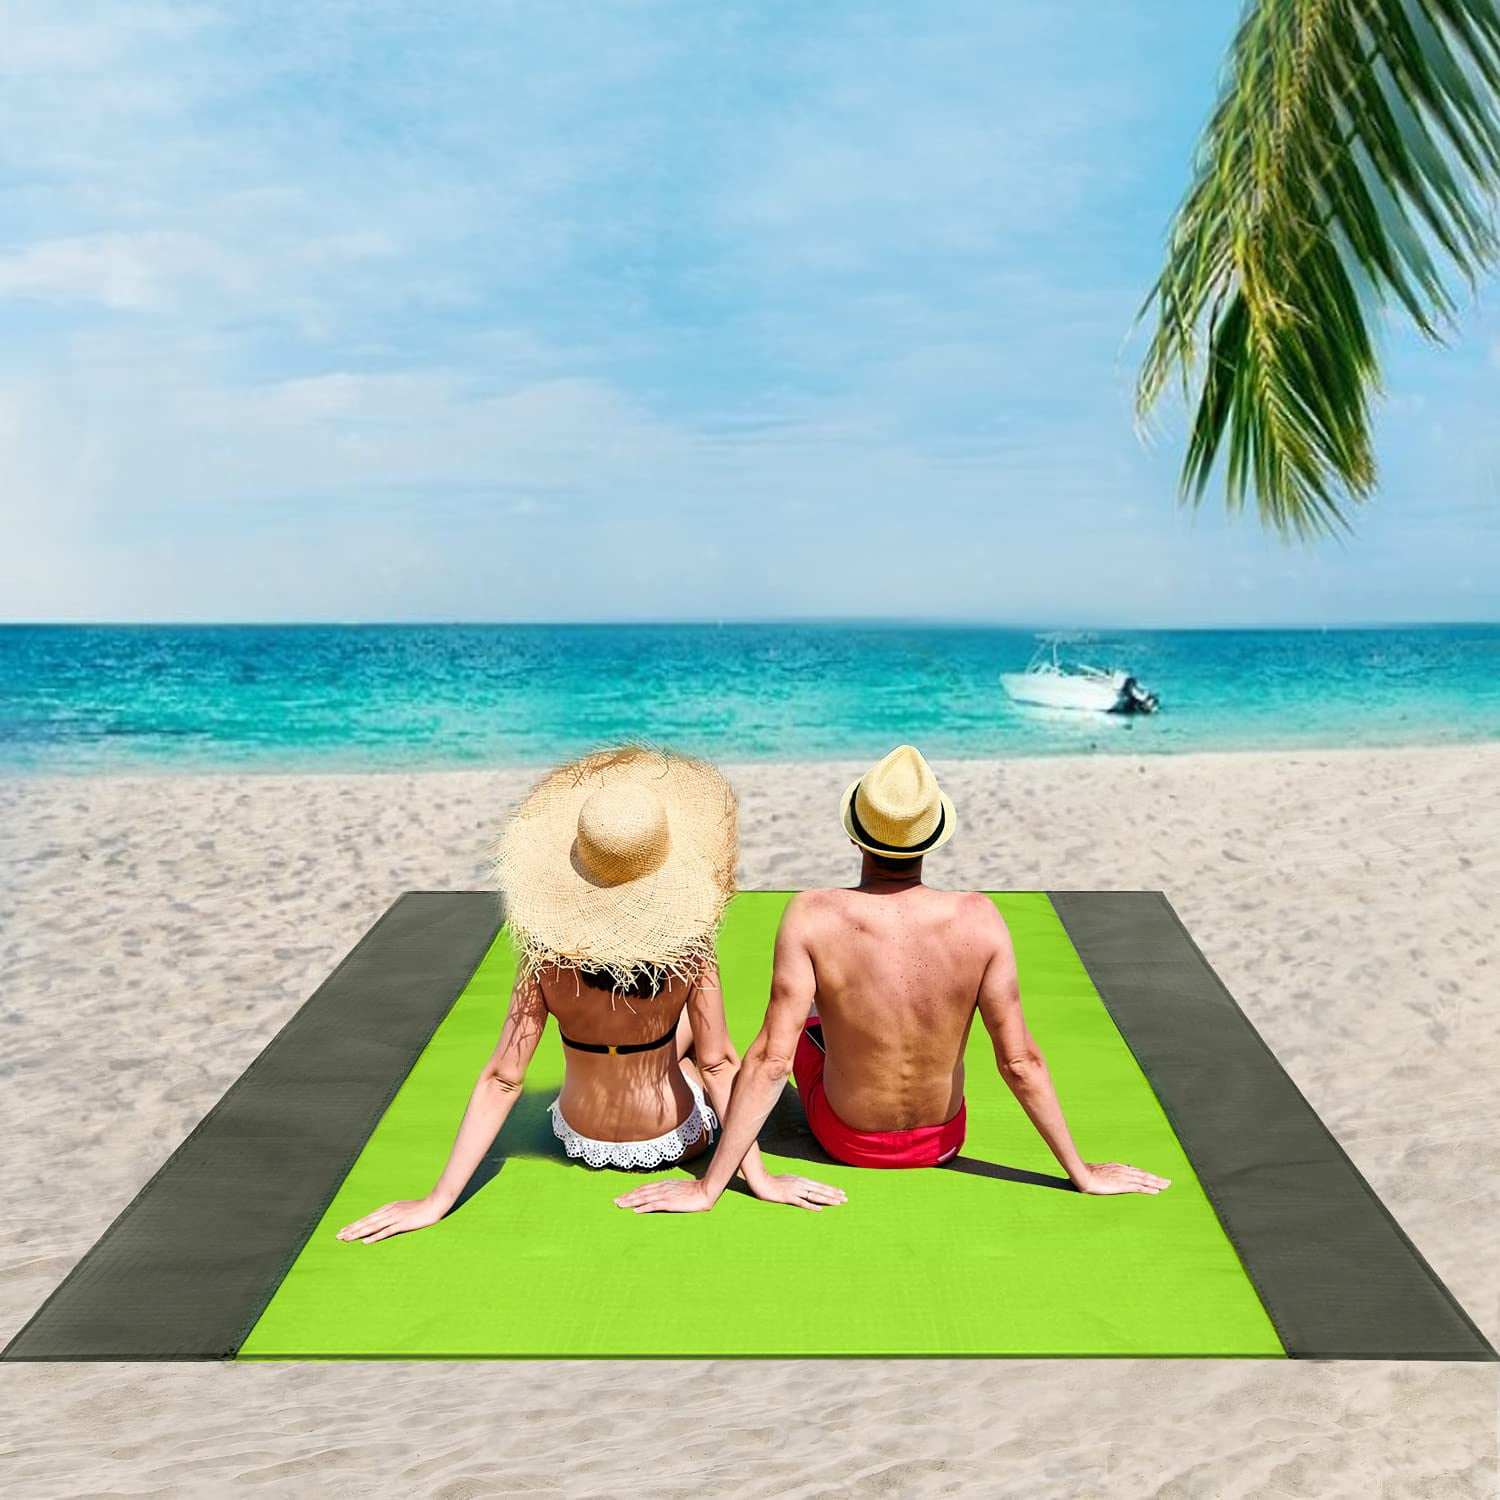 Details about    Sand Free Beach Mat Outdoor Picnic Blanket Pad Rug Camping Mattress Waterproof 